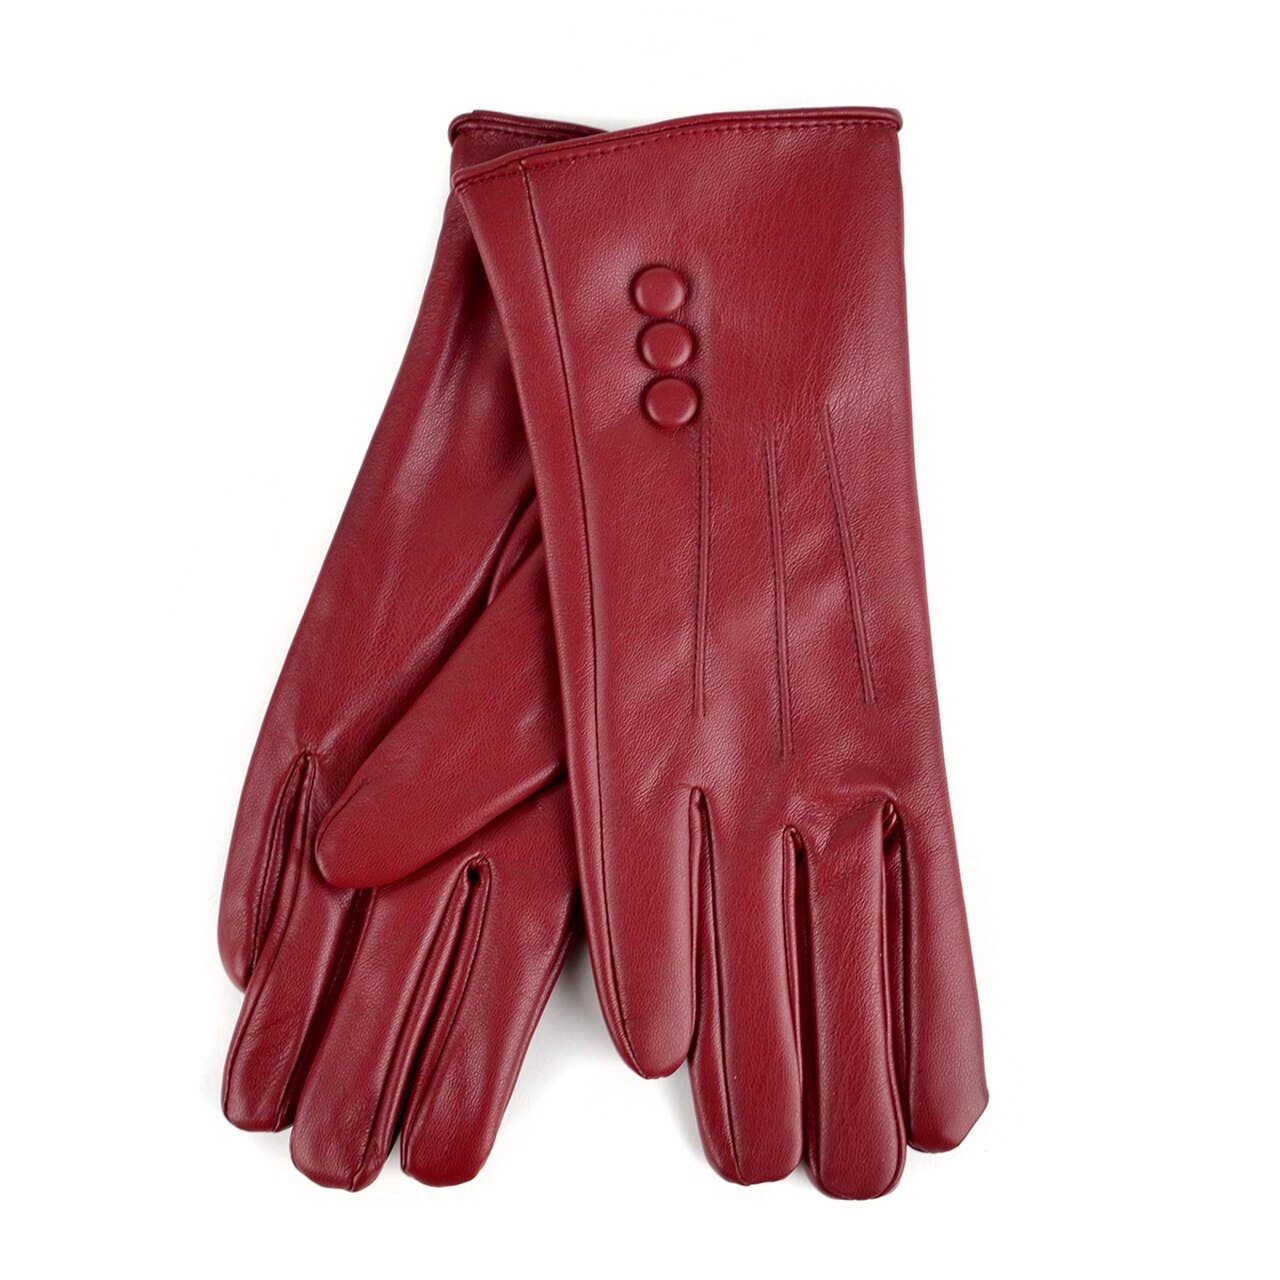 Women's PU Leather Winter Touch Screen Gloves: Black / L/XL